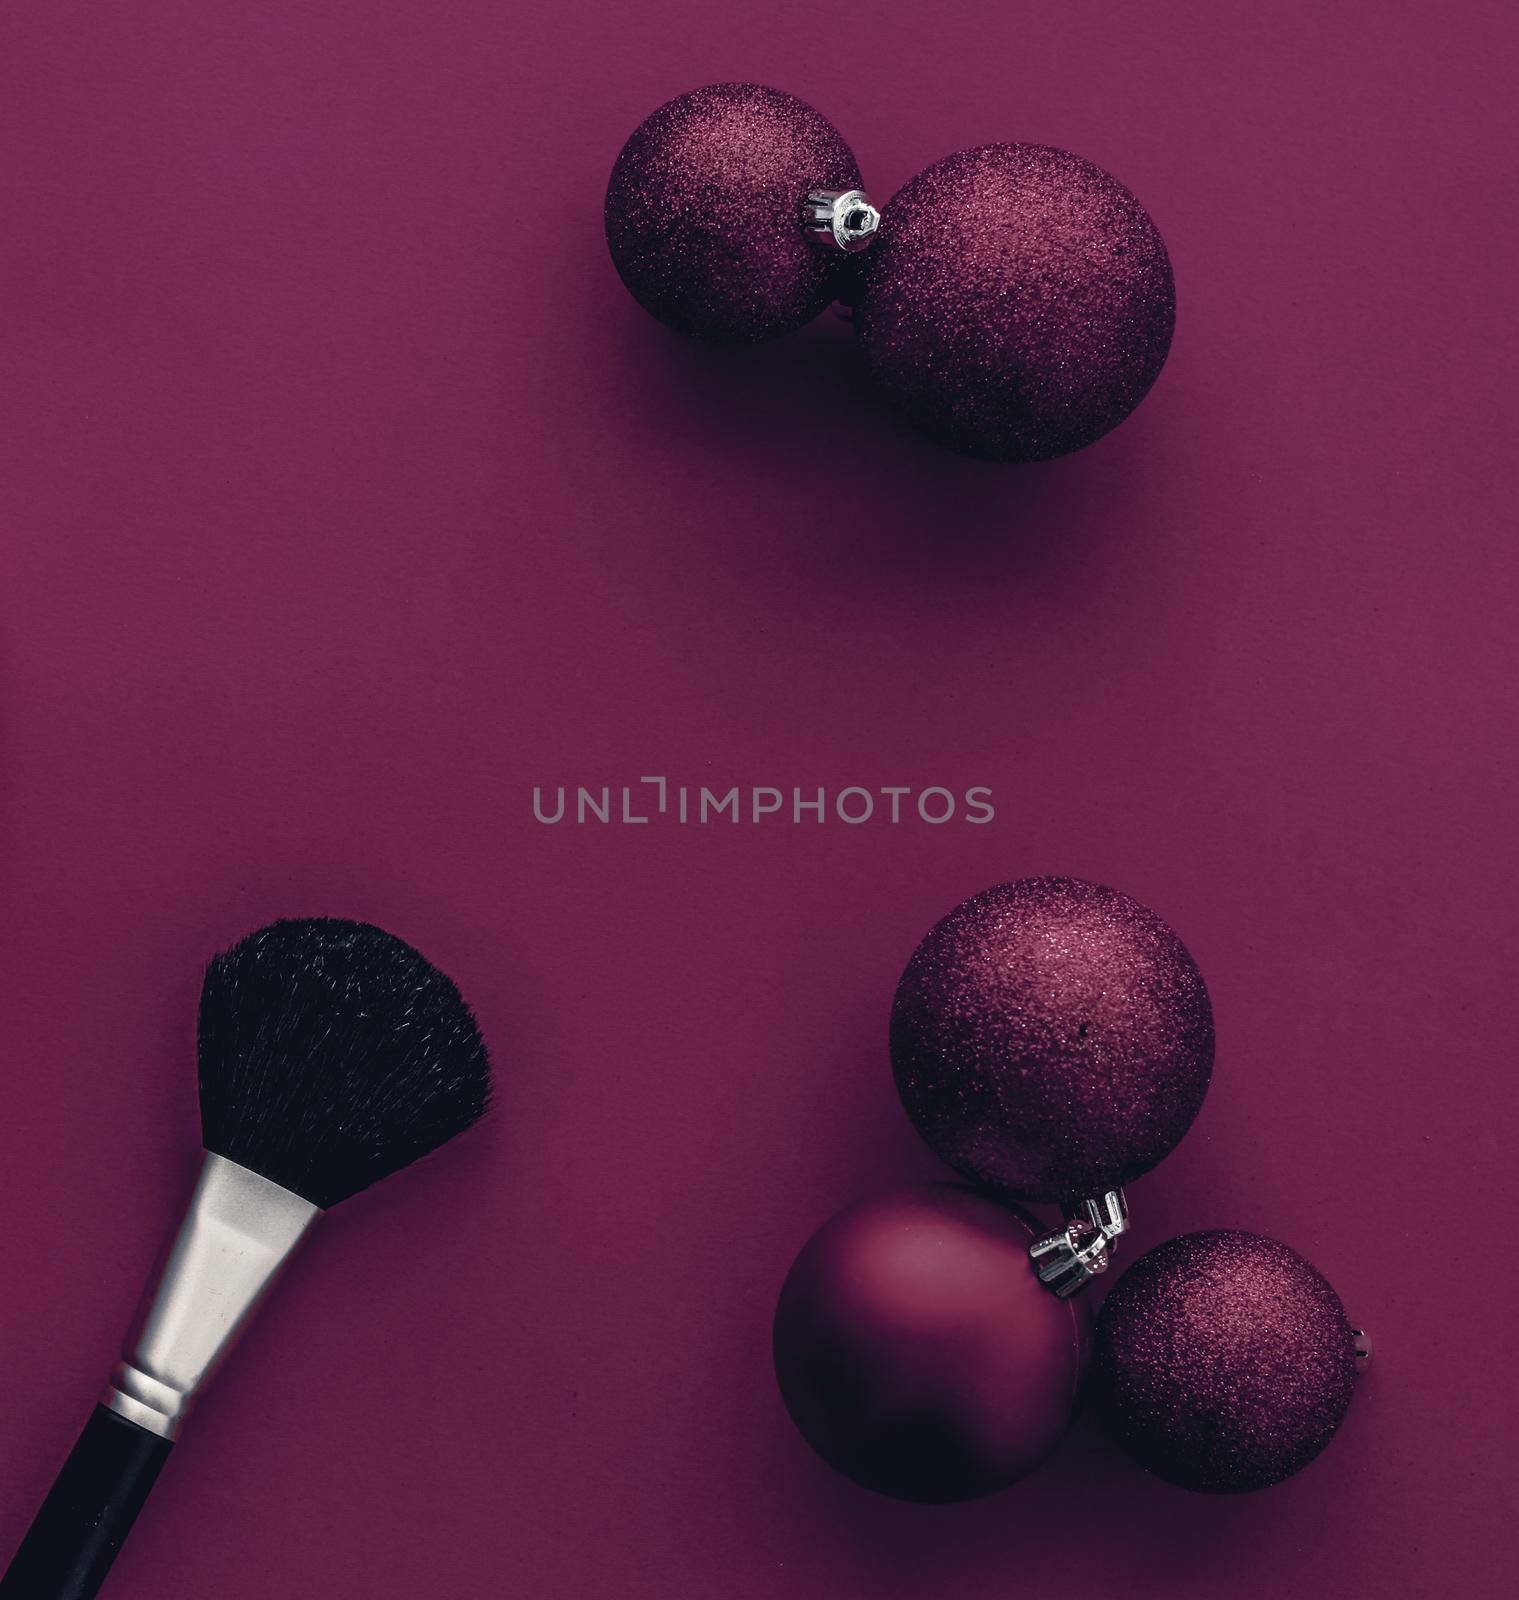 Make-up and cosmetics product set for beauty brand Christmas sale promotion, luxury magenta flatlay background as holiday design by Anneleven